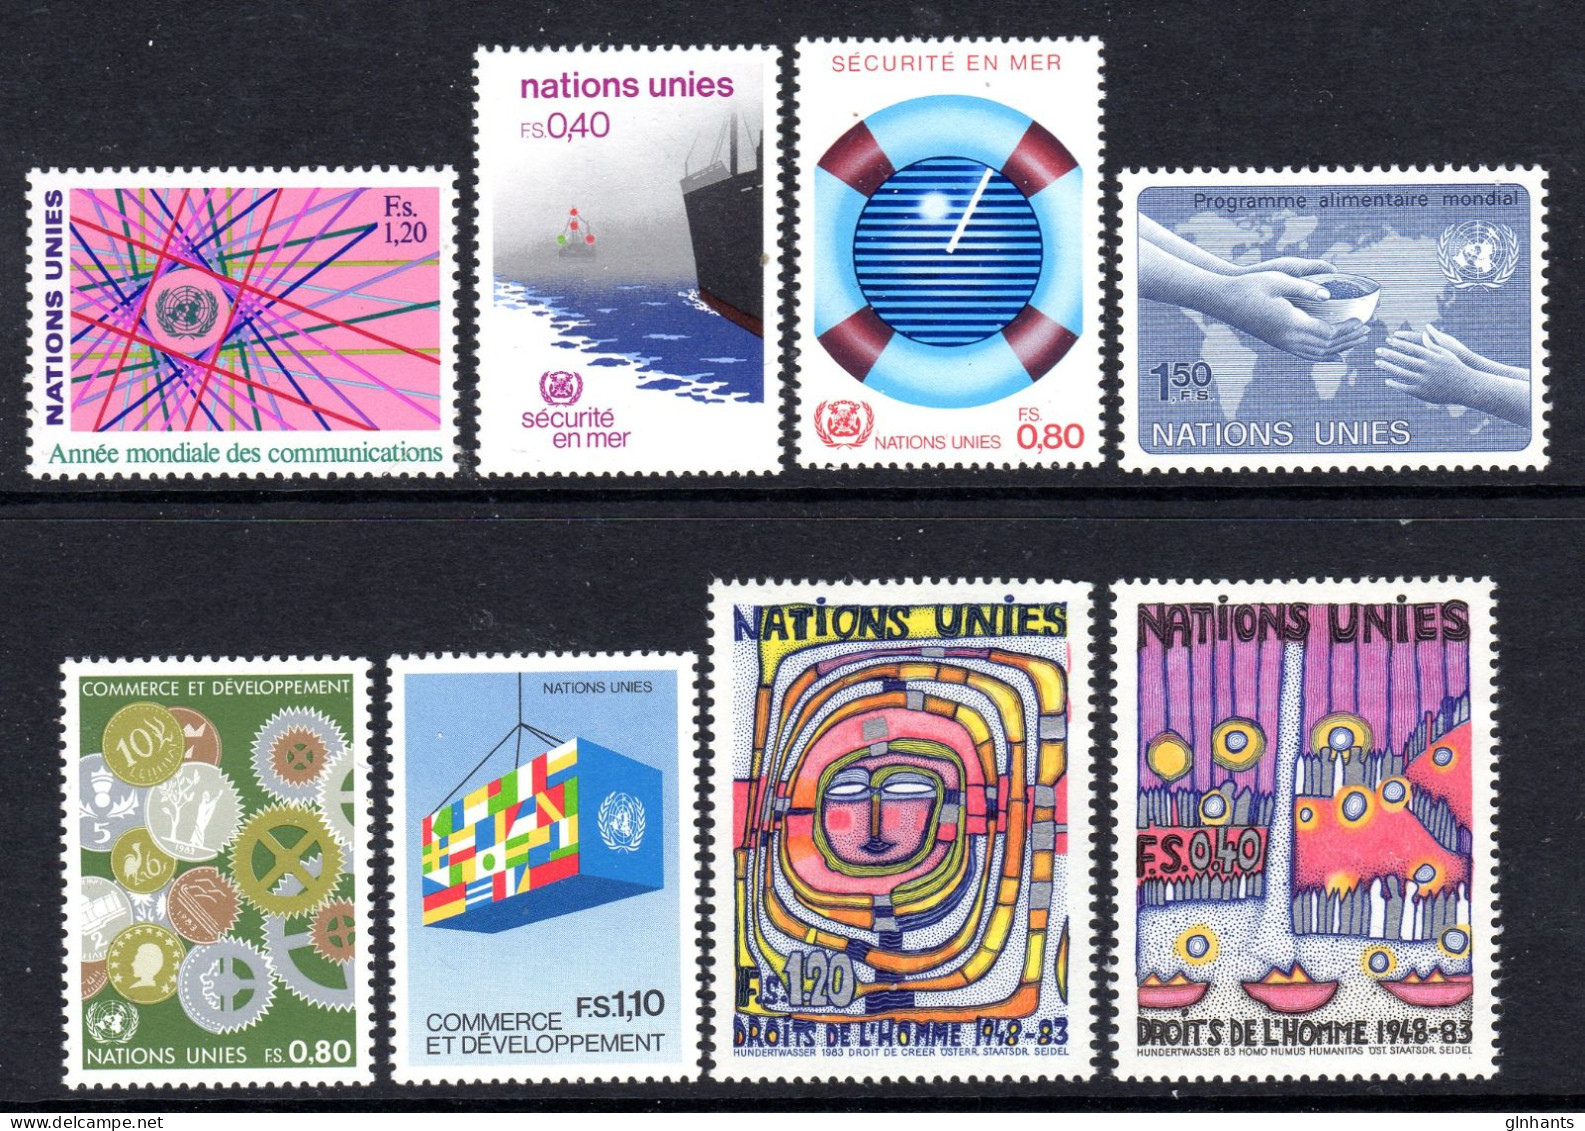 UNITED NATIONS UN GENEVA - 1983 COMPLETE YEAR SET (8V) AS PICTURED FINE MNH ** SG G113-G120 - Nuovi